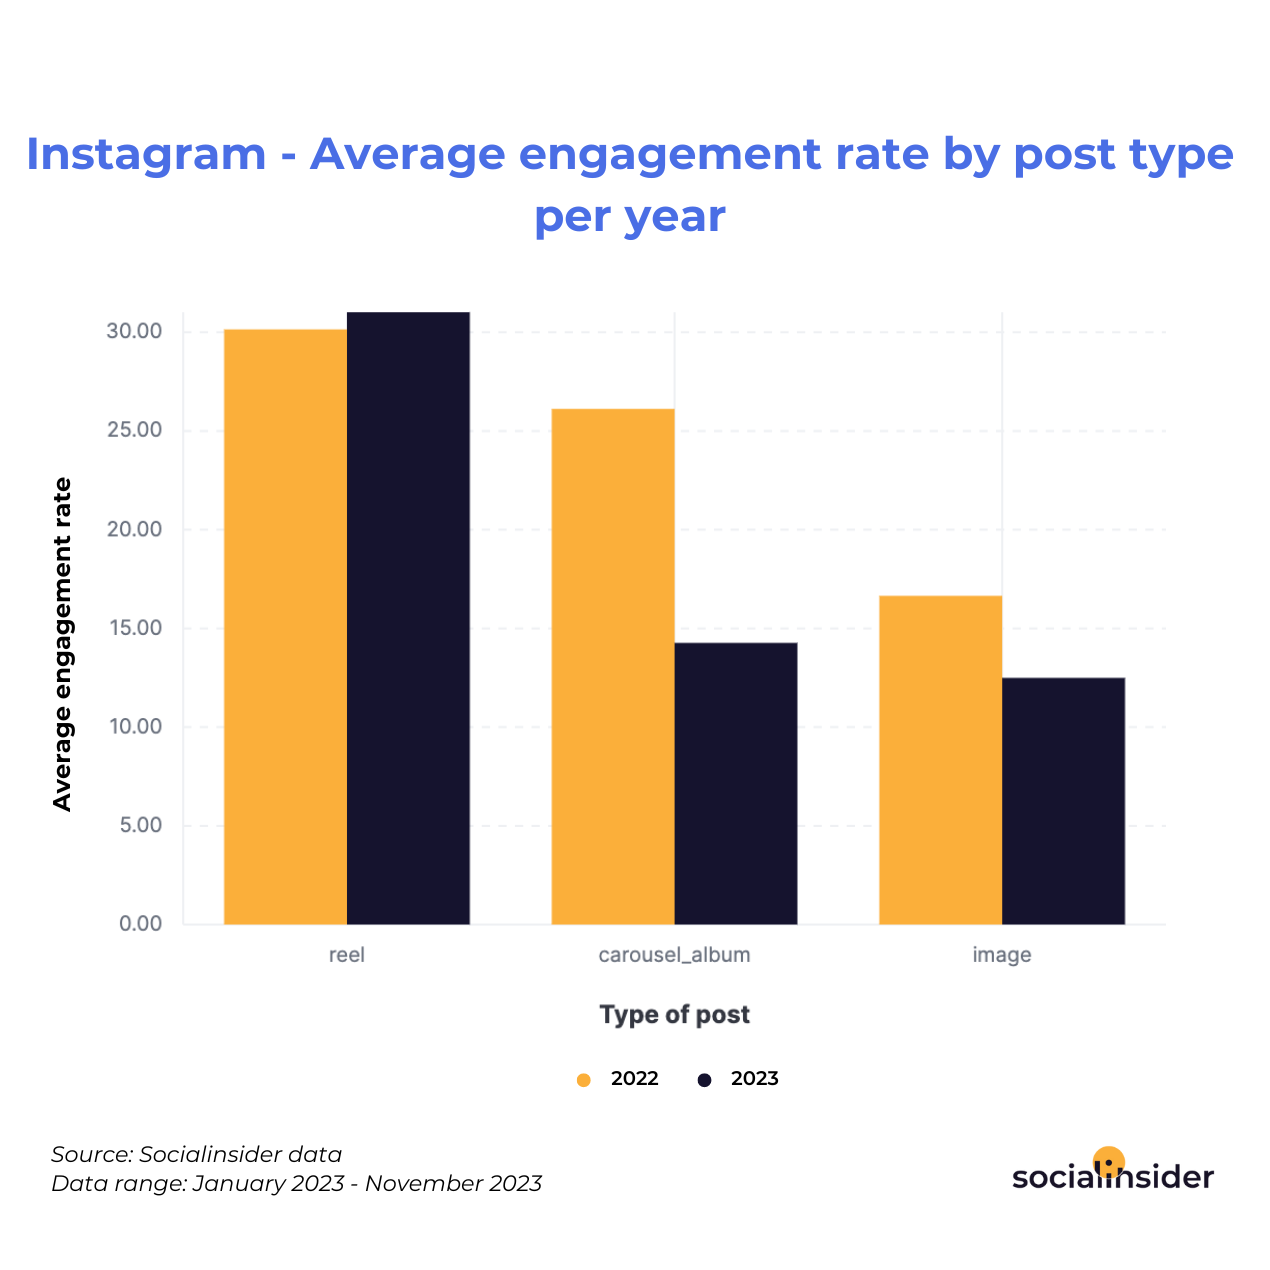 Instagram - Average engagement rate by post type per year